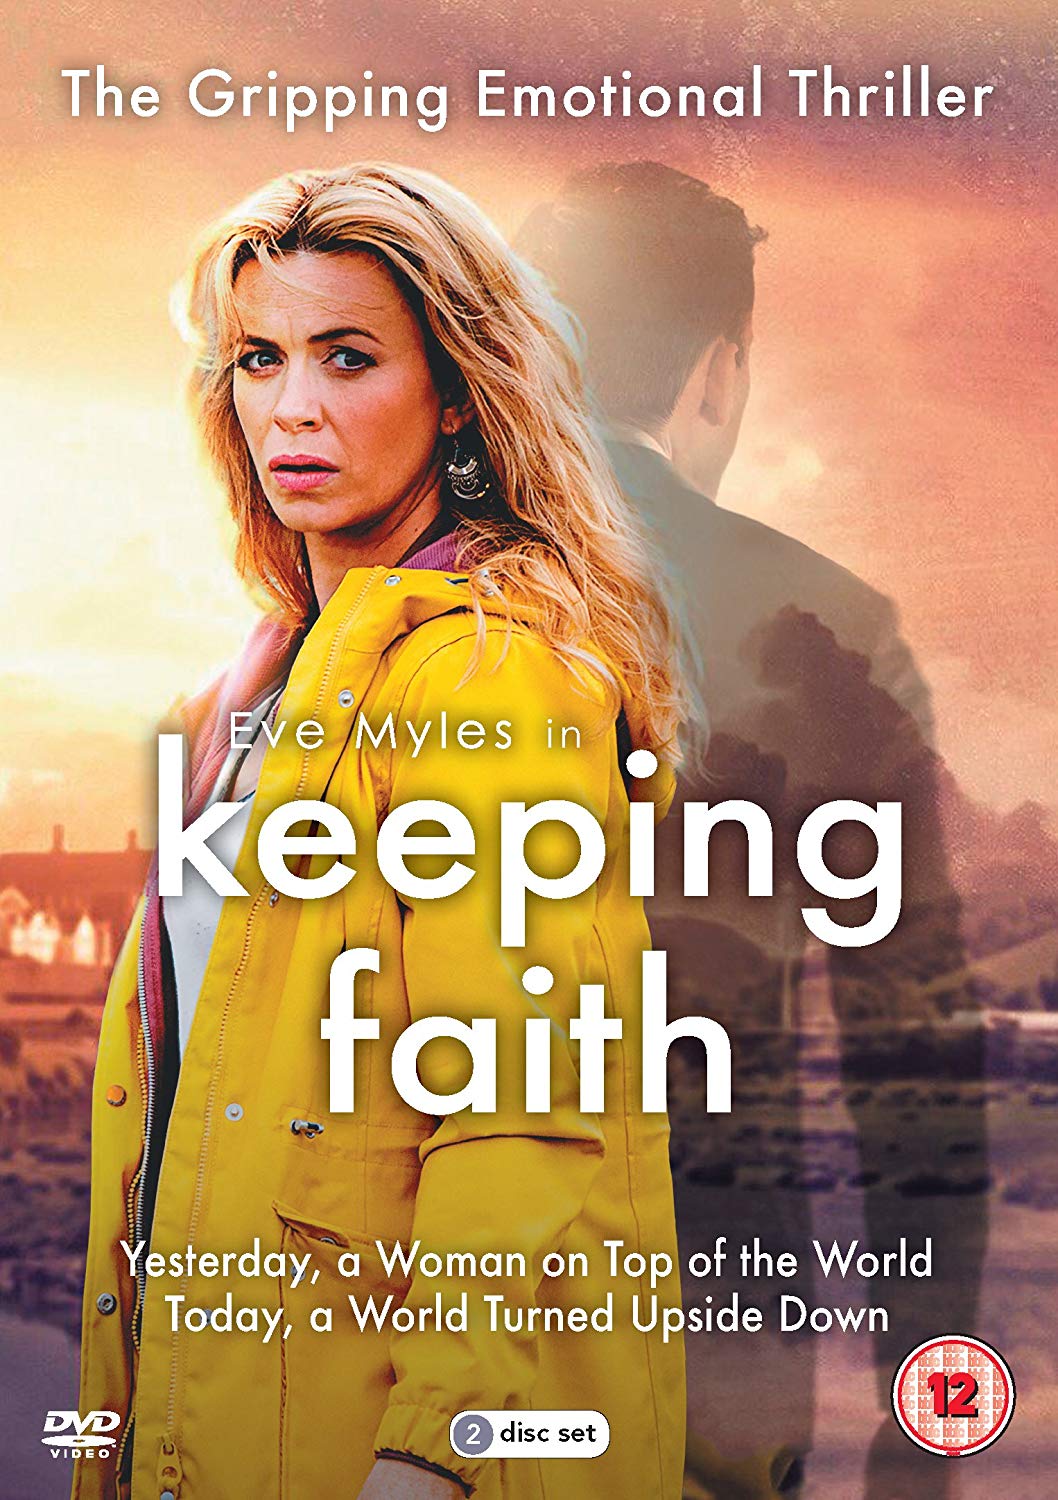 boom competitions - win Keeping Faith on DVD